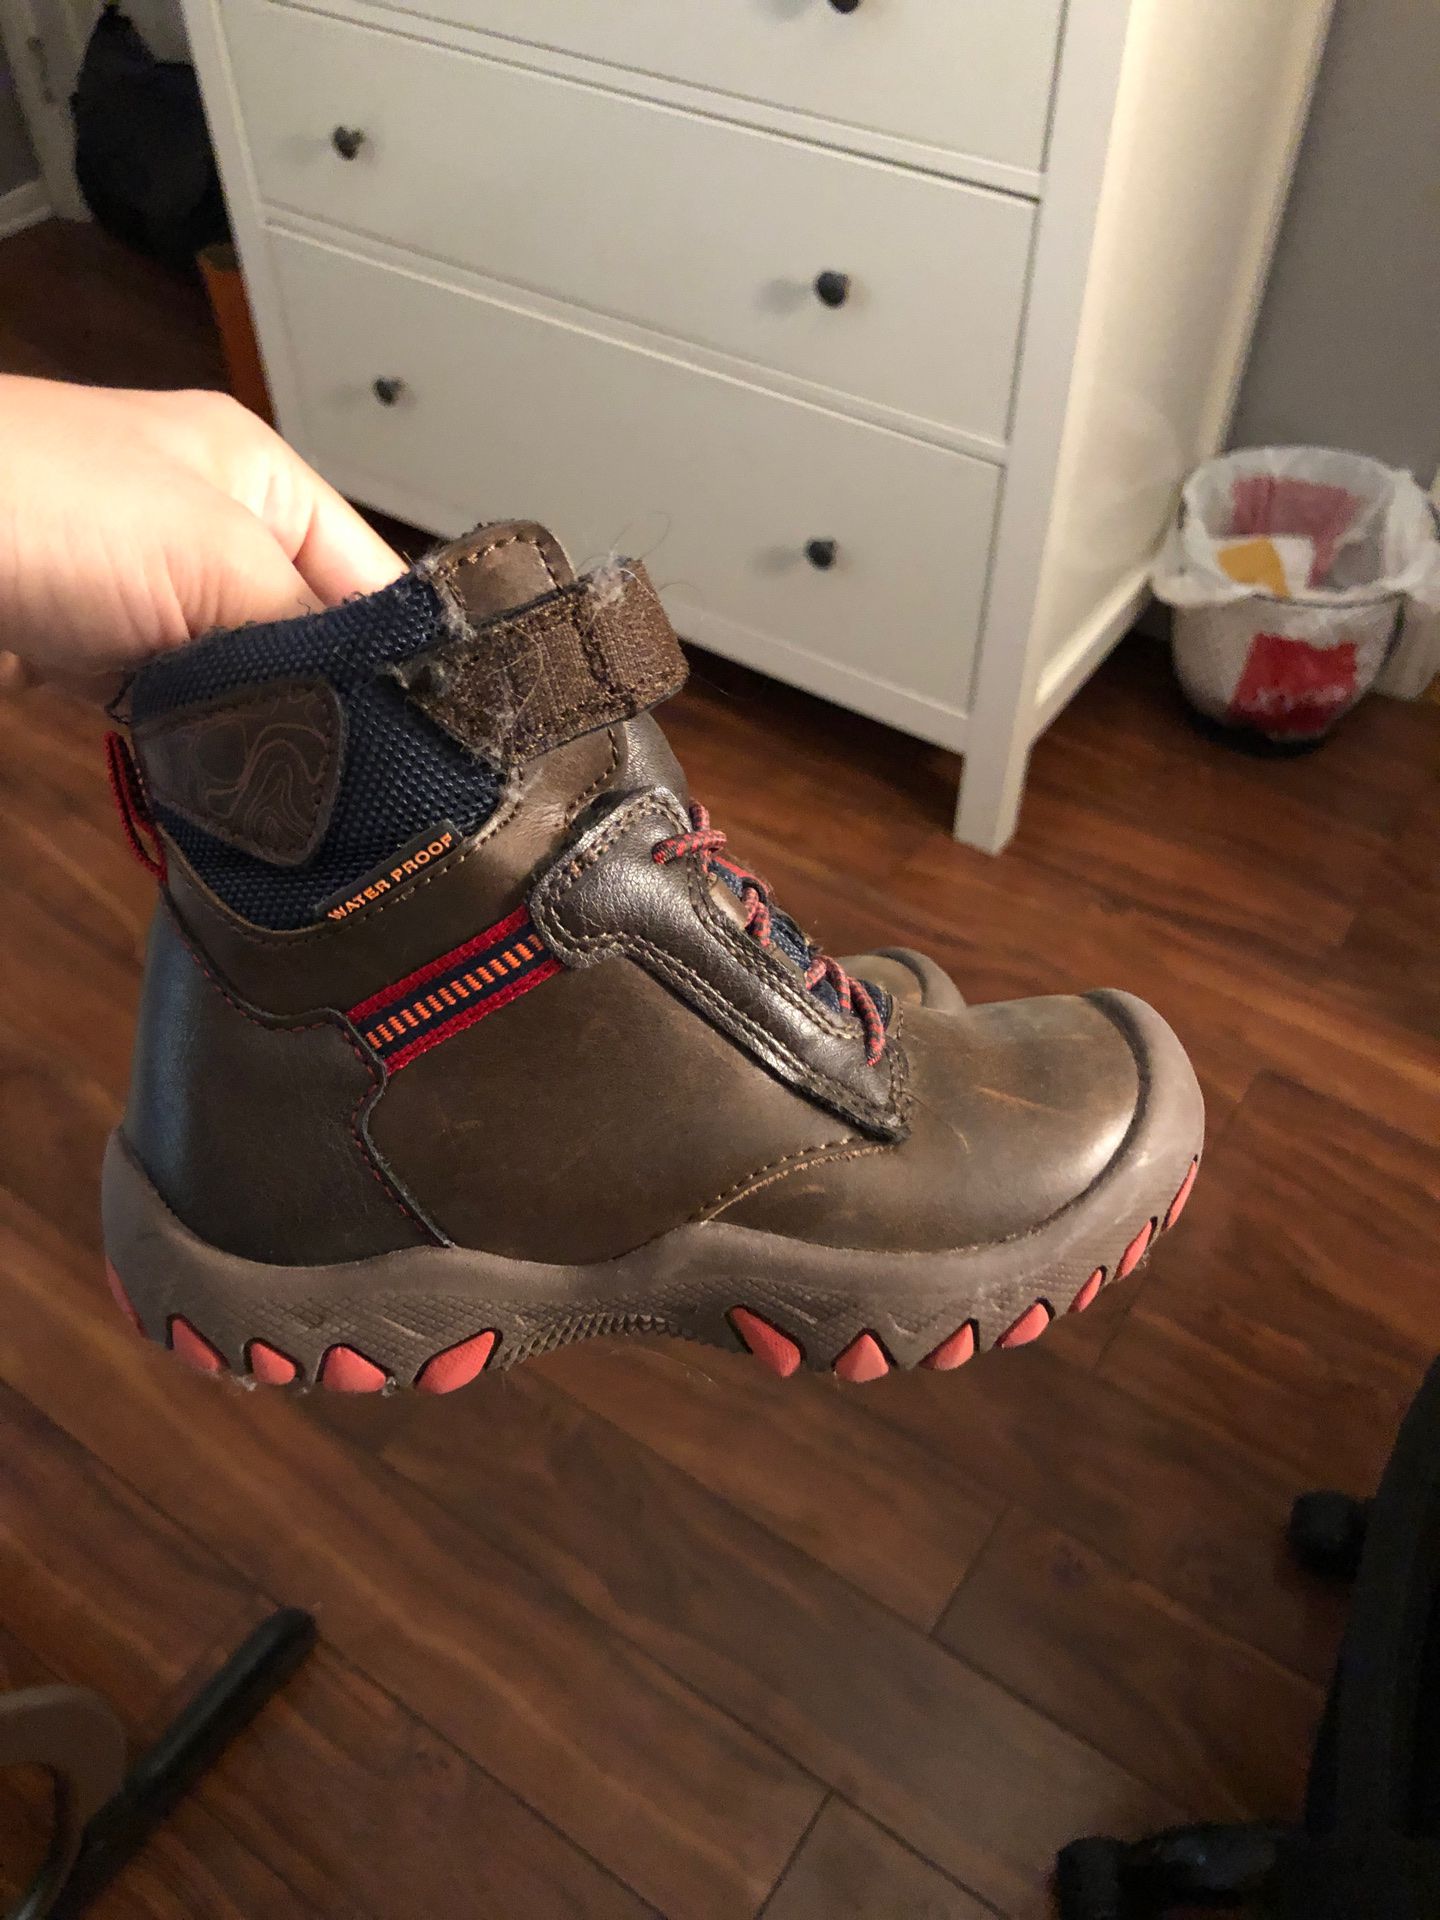 Boys size 11 weather boots